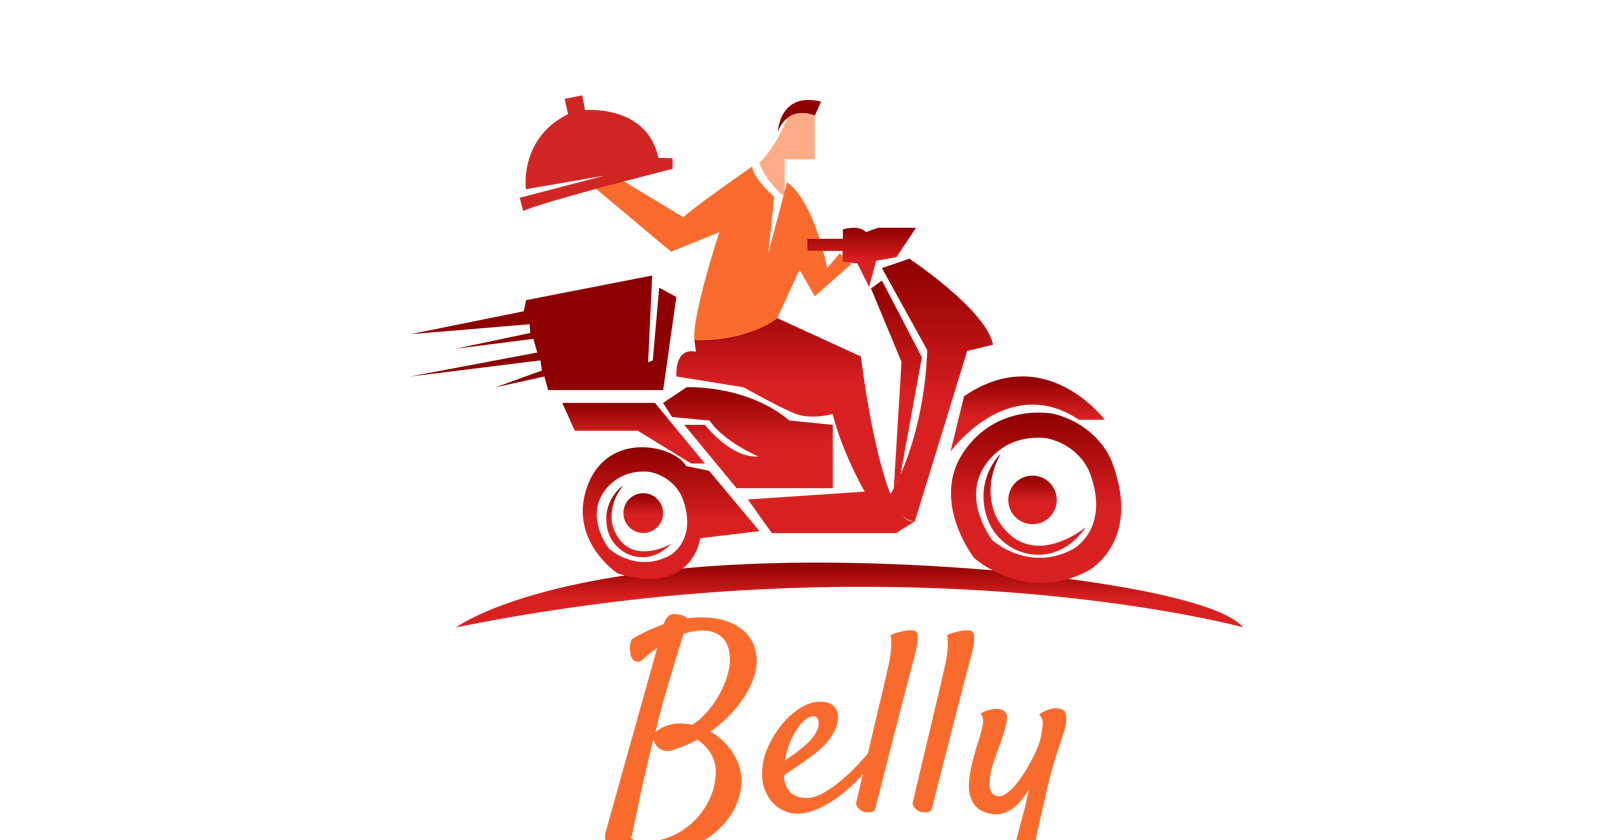 Product Requirement Document of a Food Ordering App- Belly Time PM-4